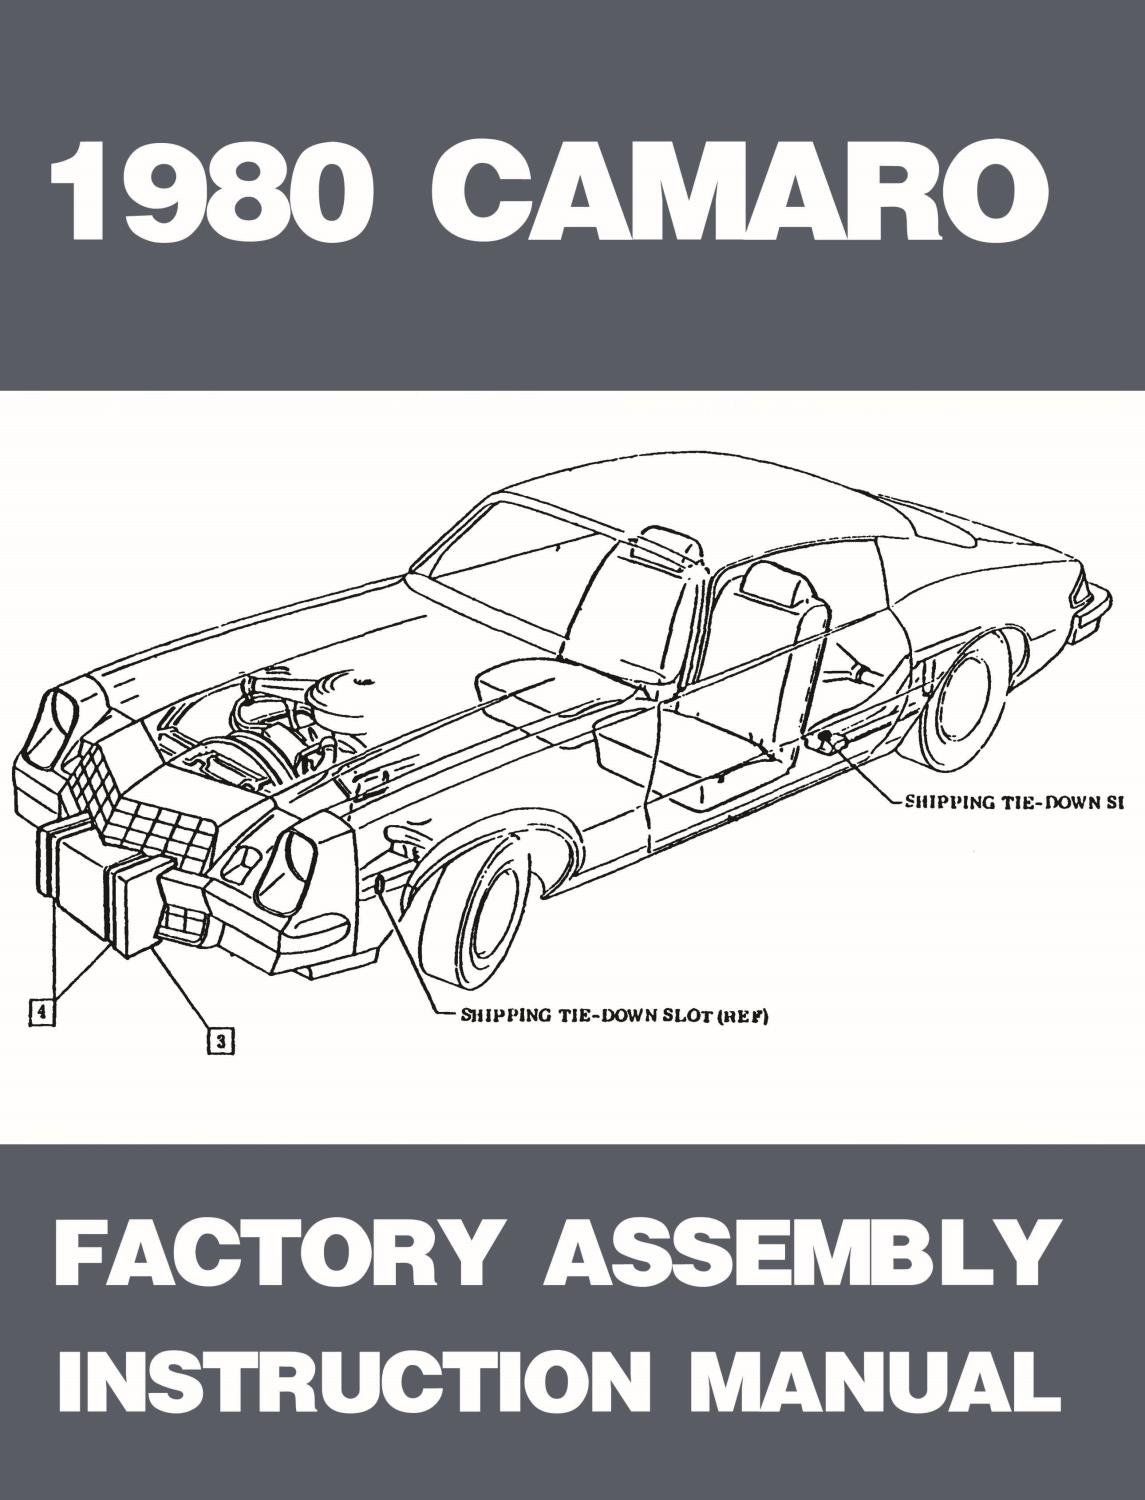 Factory Assembly Instruction Manual for 1980 Chevrolet Camaro